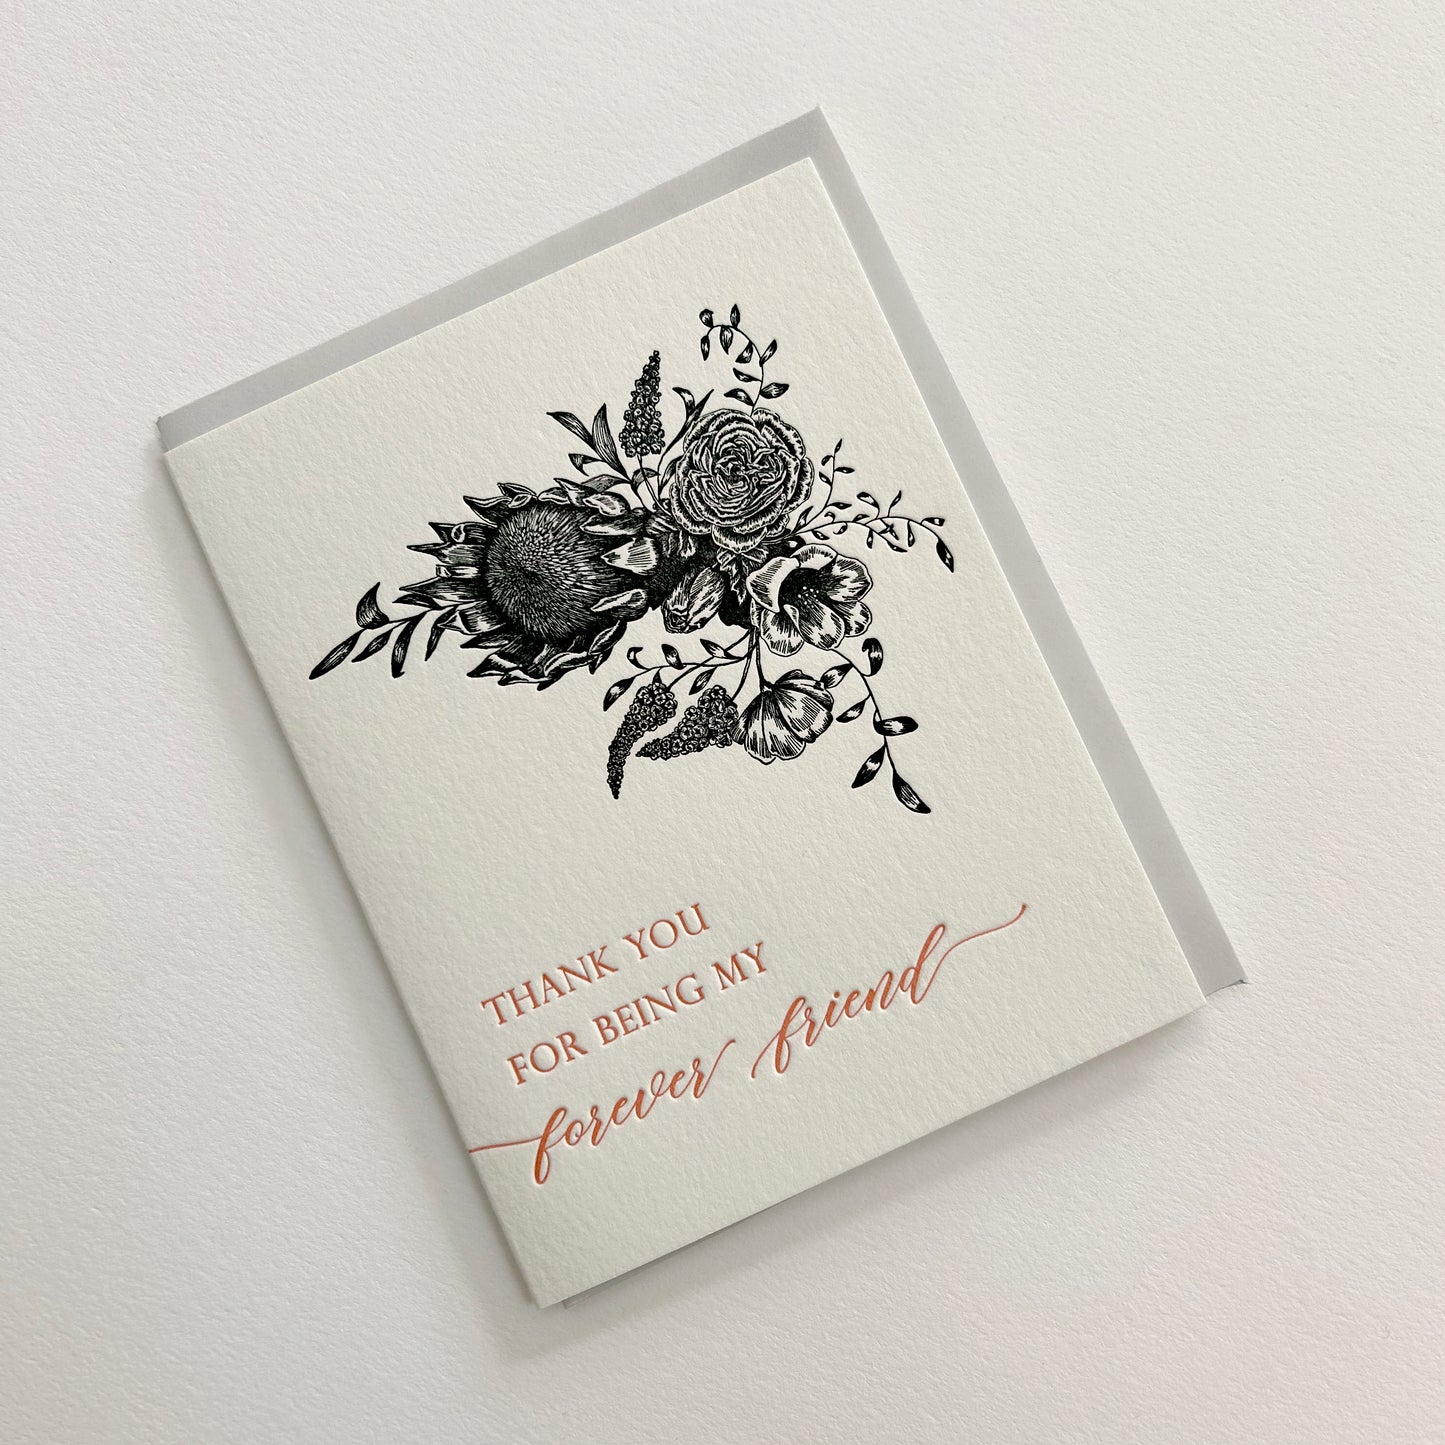 Thank You For Being My Forever Friend Letterpress Greeting Card